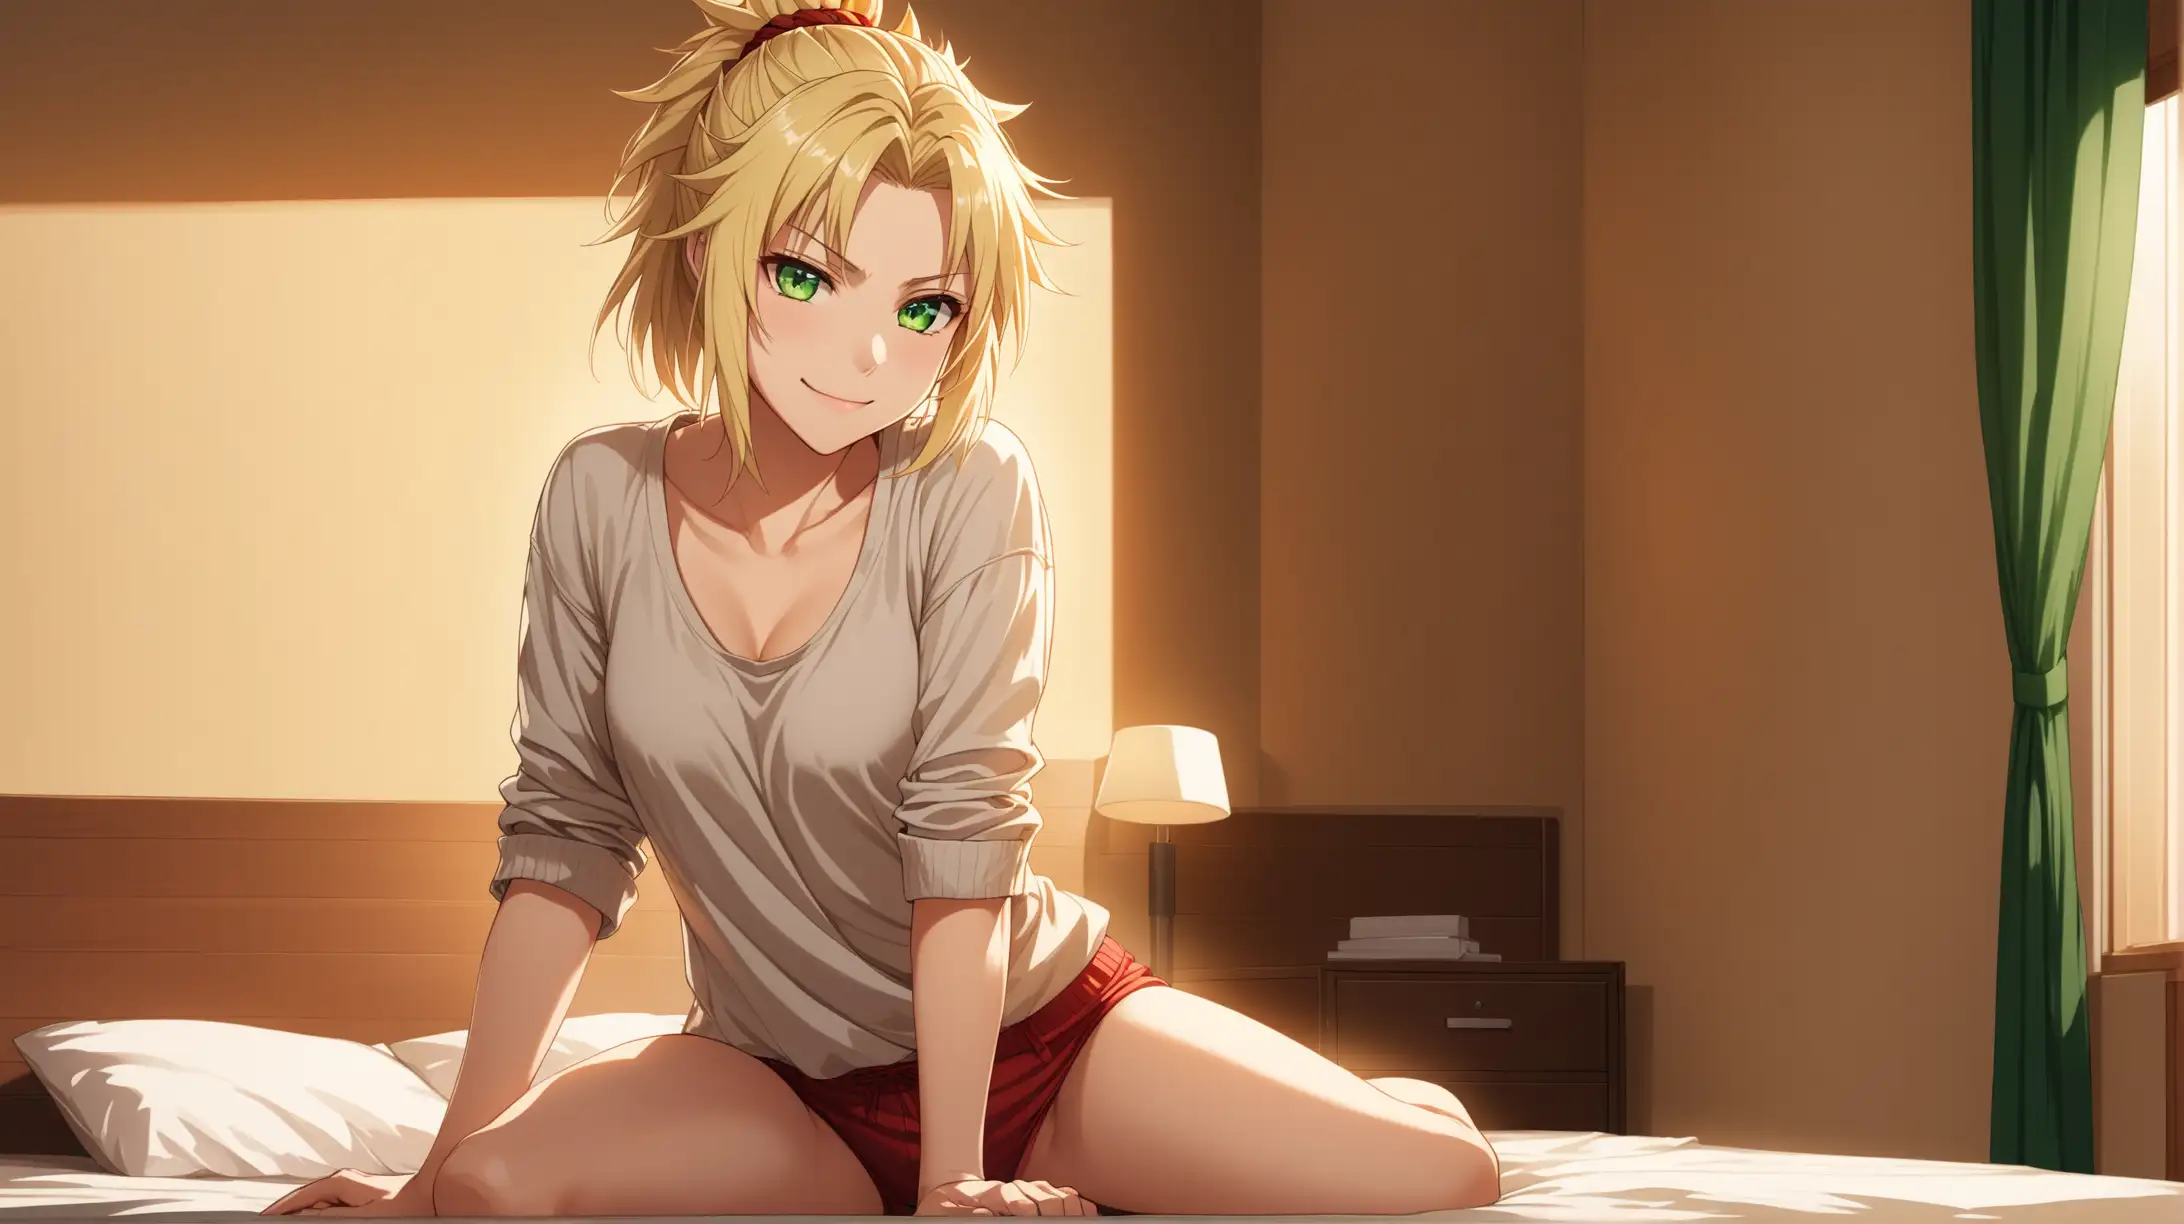 Seductive Mordred in Casual Wear Alluring Bedroom Scene with GreenEyed Character